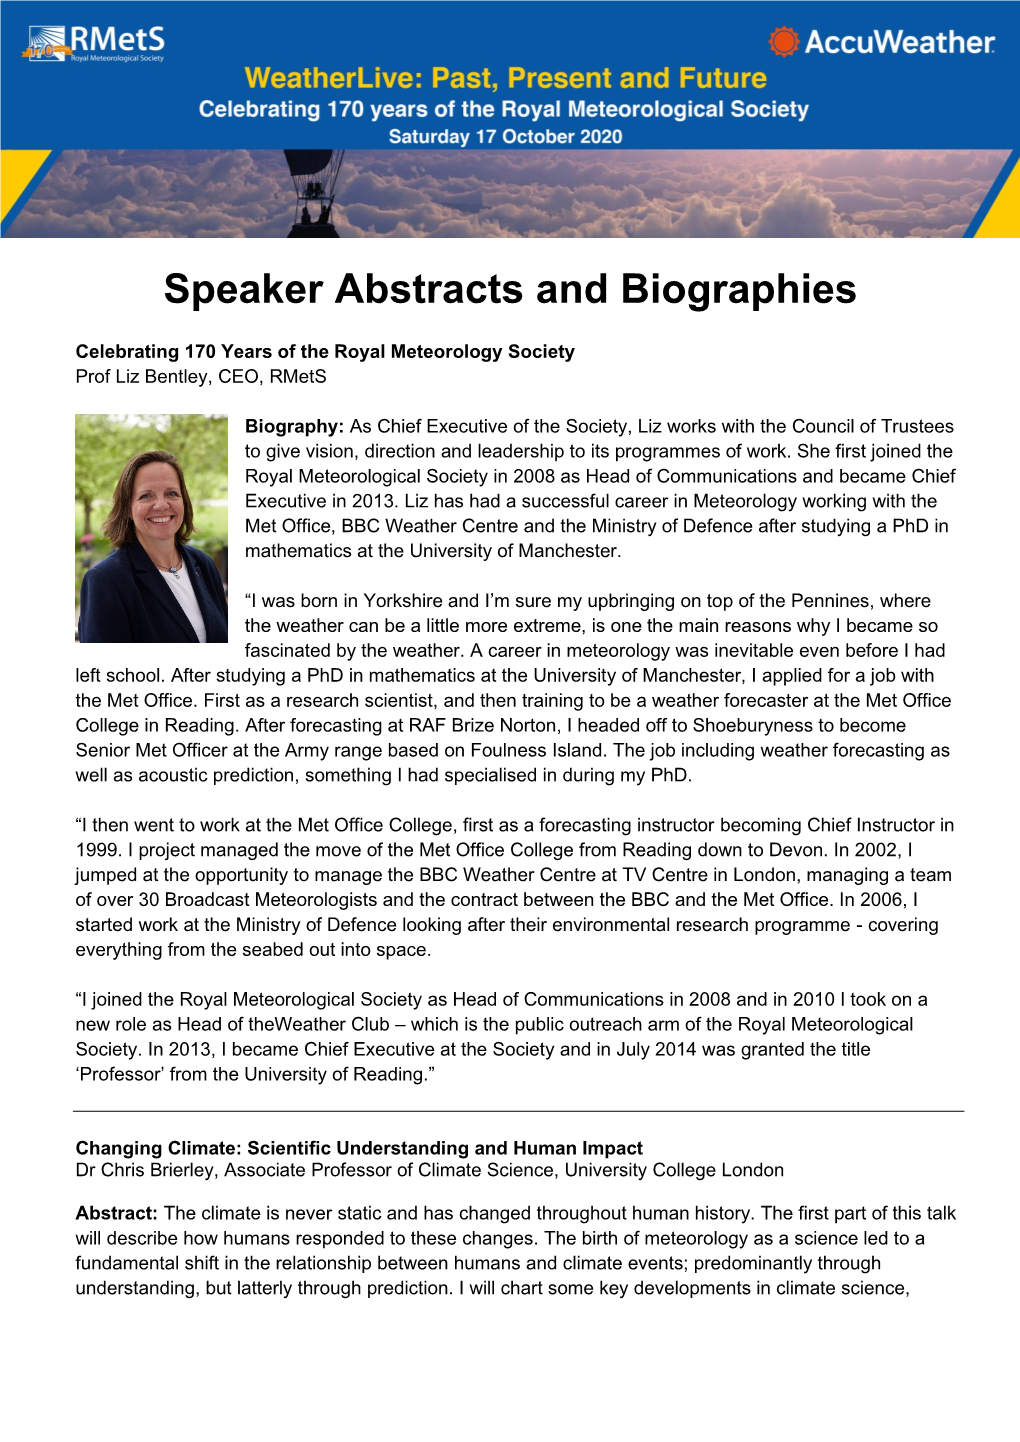 Speaker Biographies & Abstracts